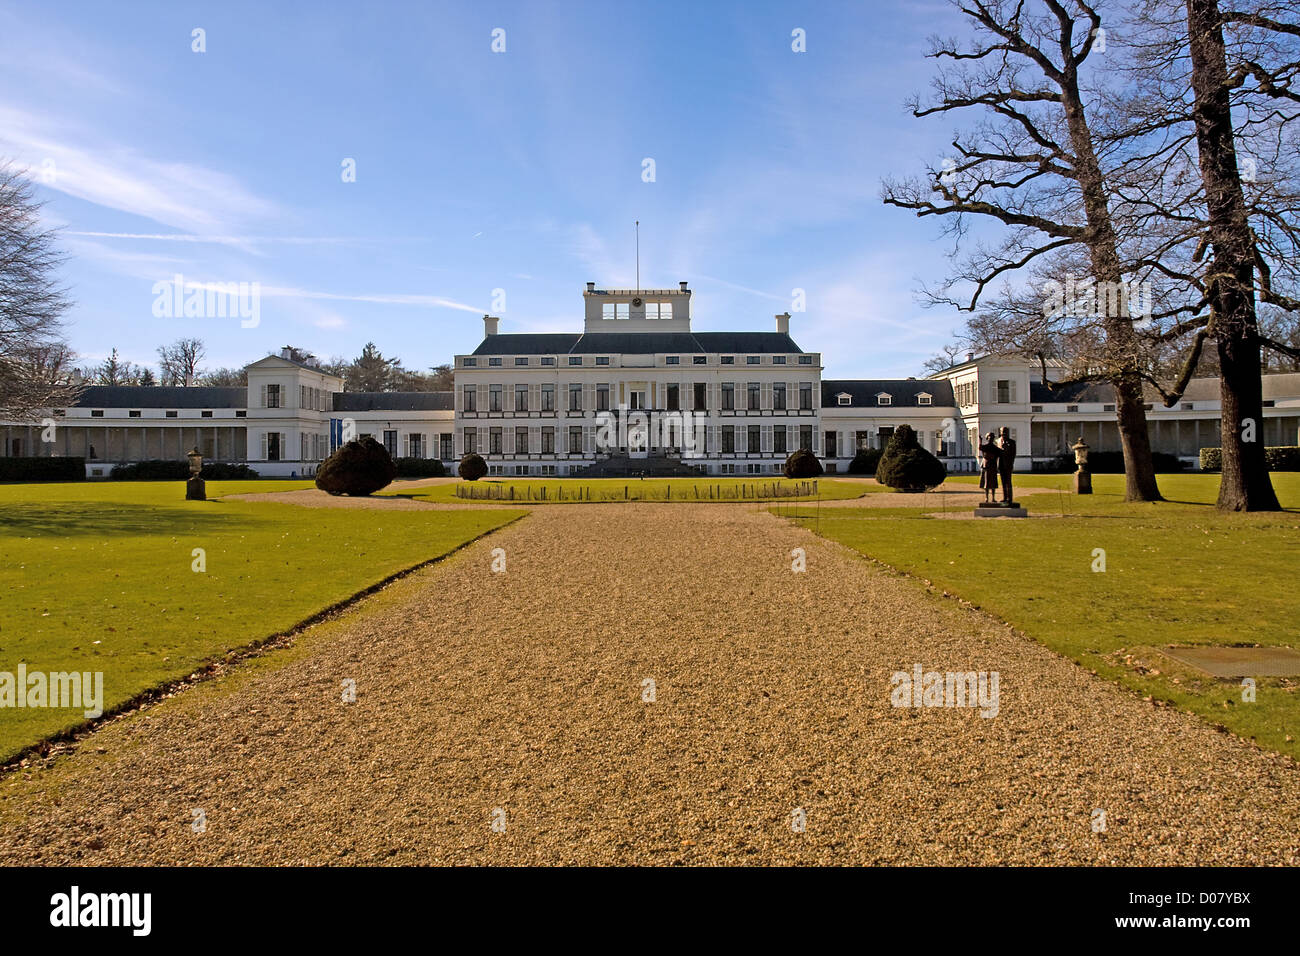 Palace Soestdijk, the former residence of Dutch royal family Queen ...